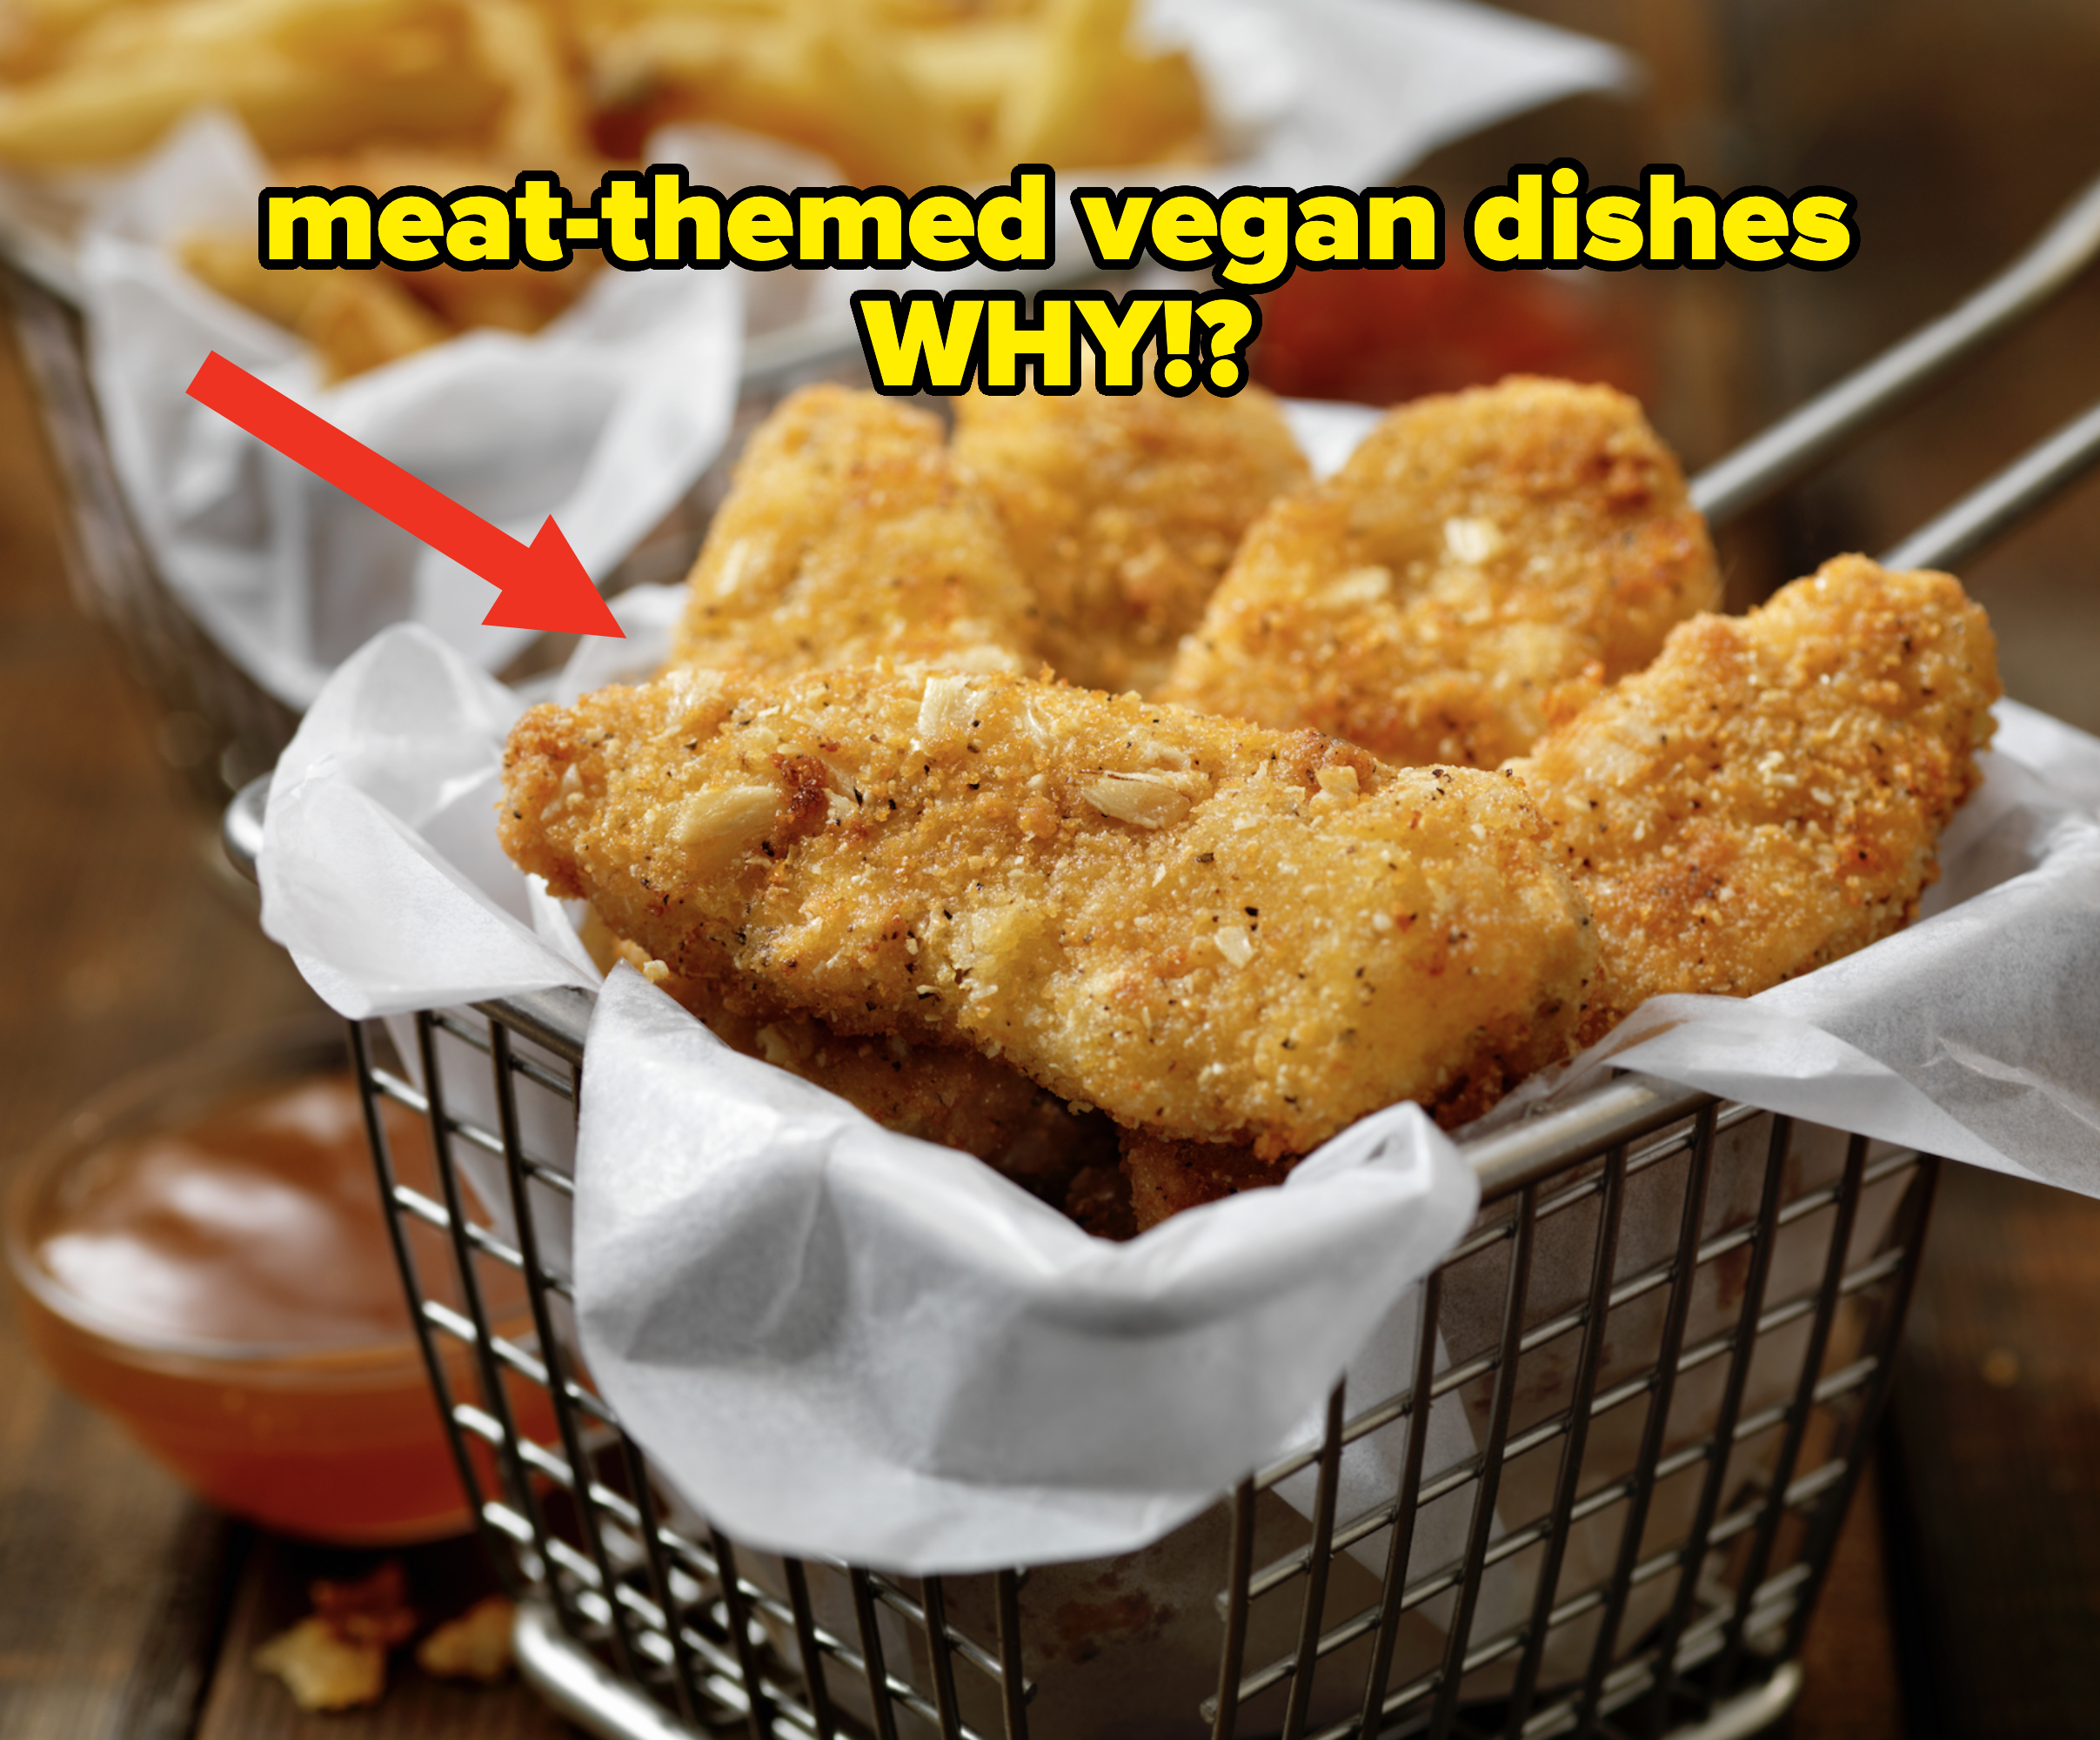 &quot;Meat-themed vegan dishes: Why!?&quot; with an arrow pointing to what looks like fried, breaded fish or meat in a tray